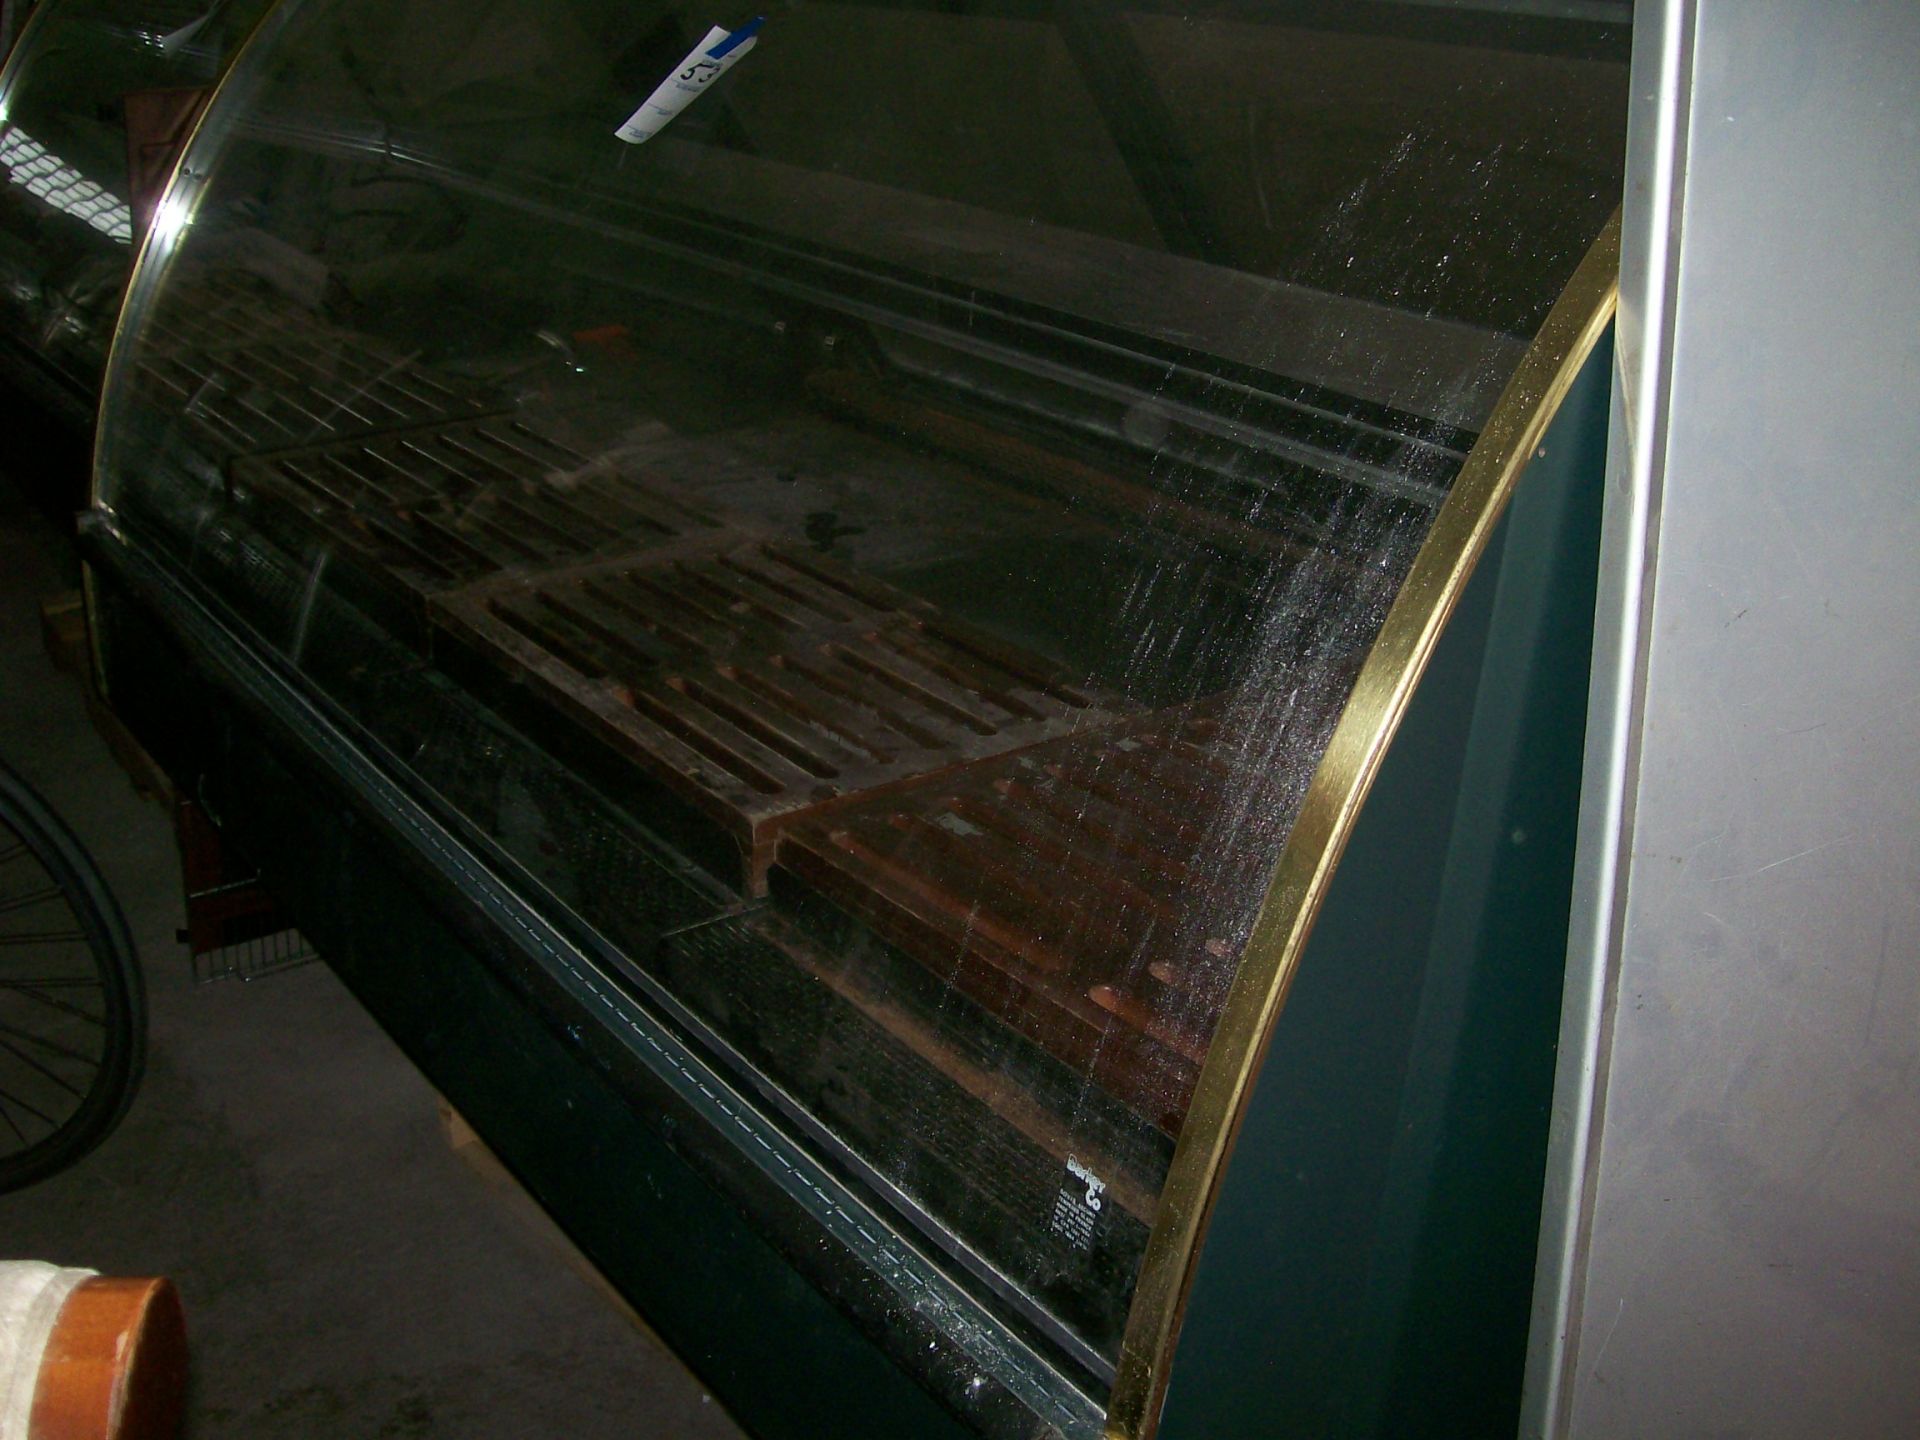 REMOTE DELI COOLER 72" CURVED GLASS & FRONT OPENING - Image 2 of 5